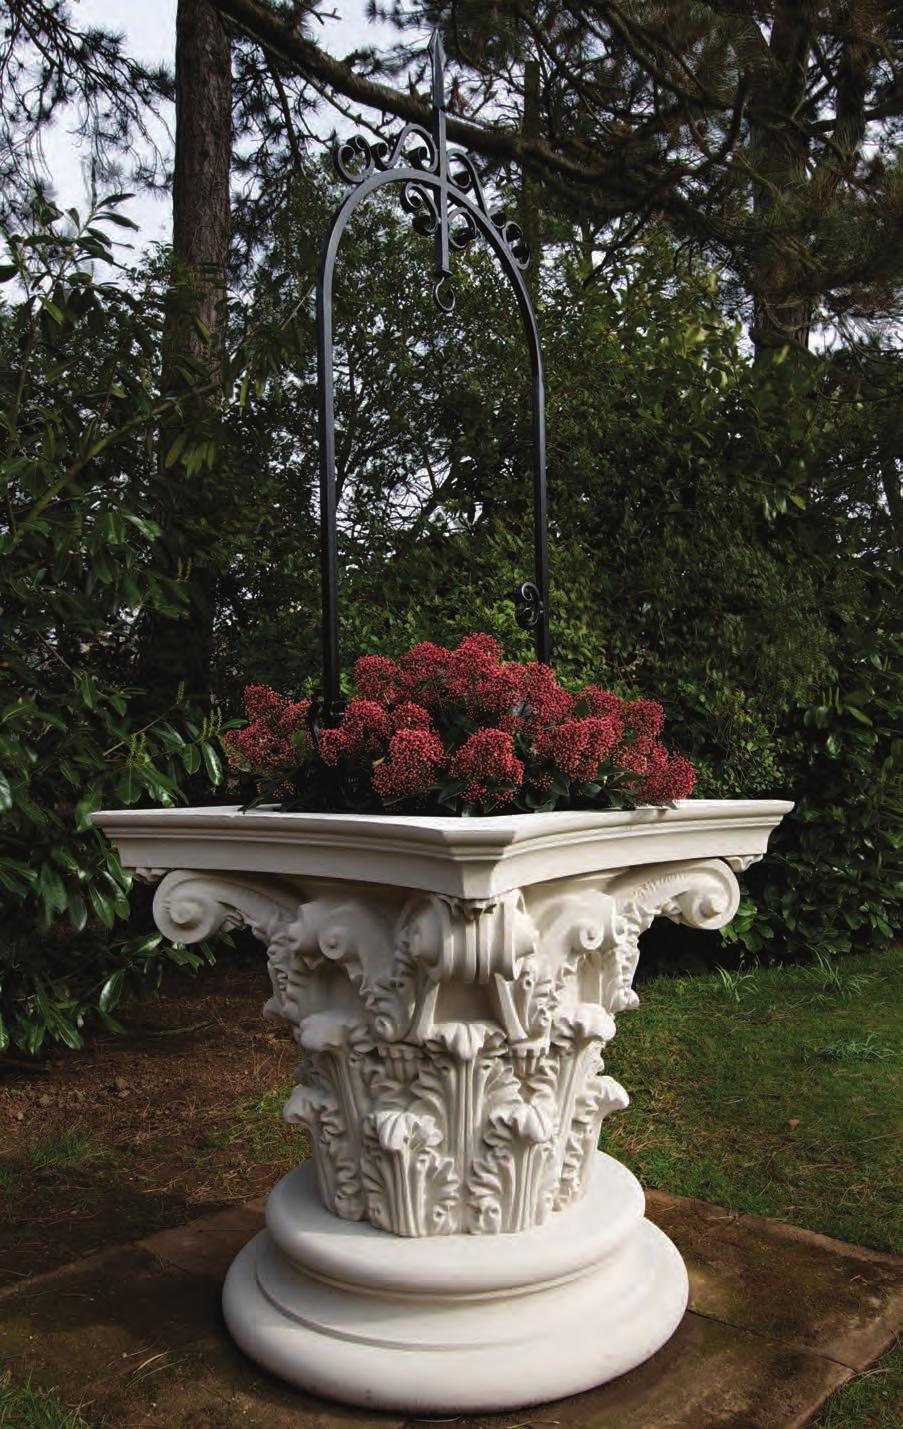 Victorian Jardiniere A710 Upper Plinth A720 Lower Plinth A730 inspired by an Austin & Seeley design, this imposing ensemble is an elegant example of the XIX century naturalist style of ornament.